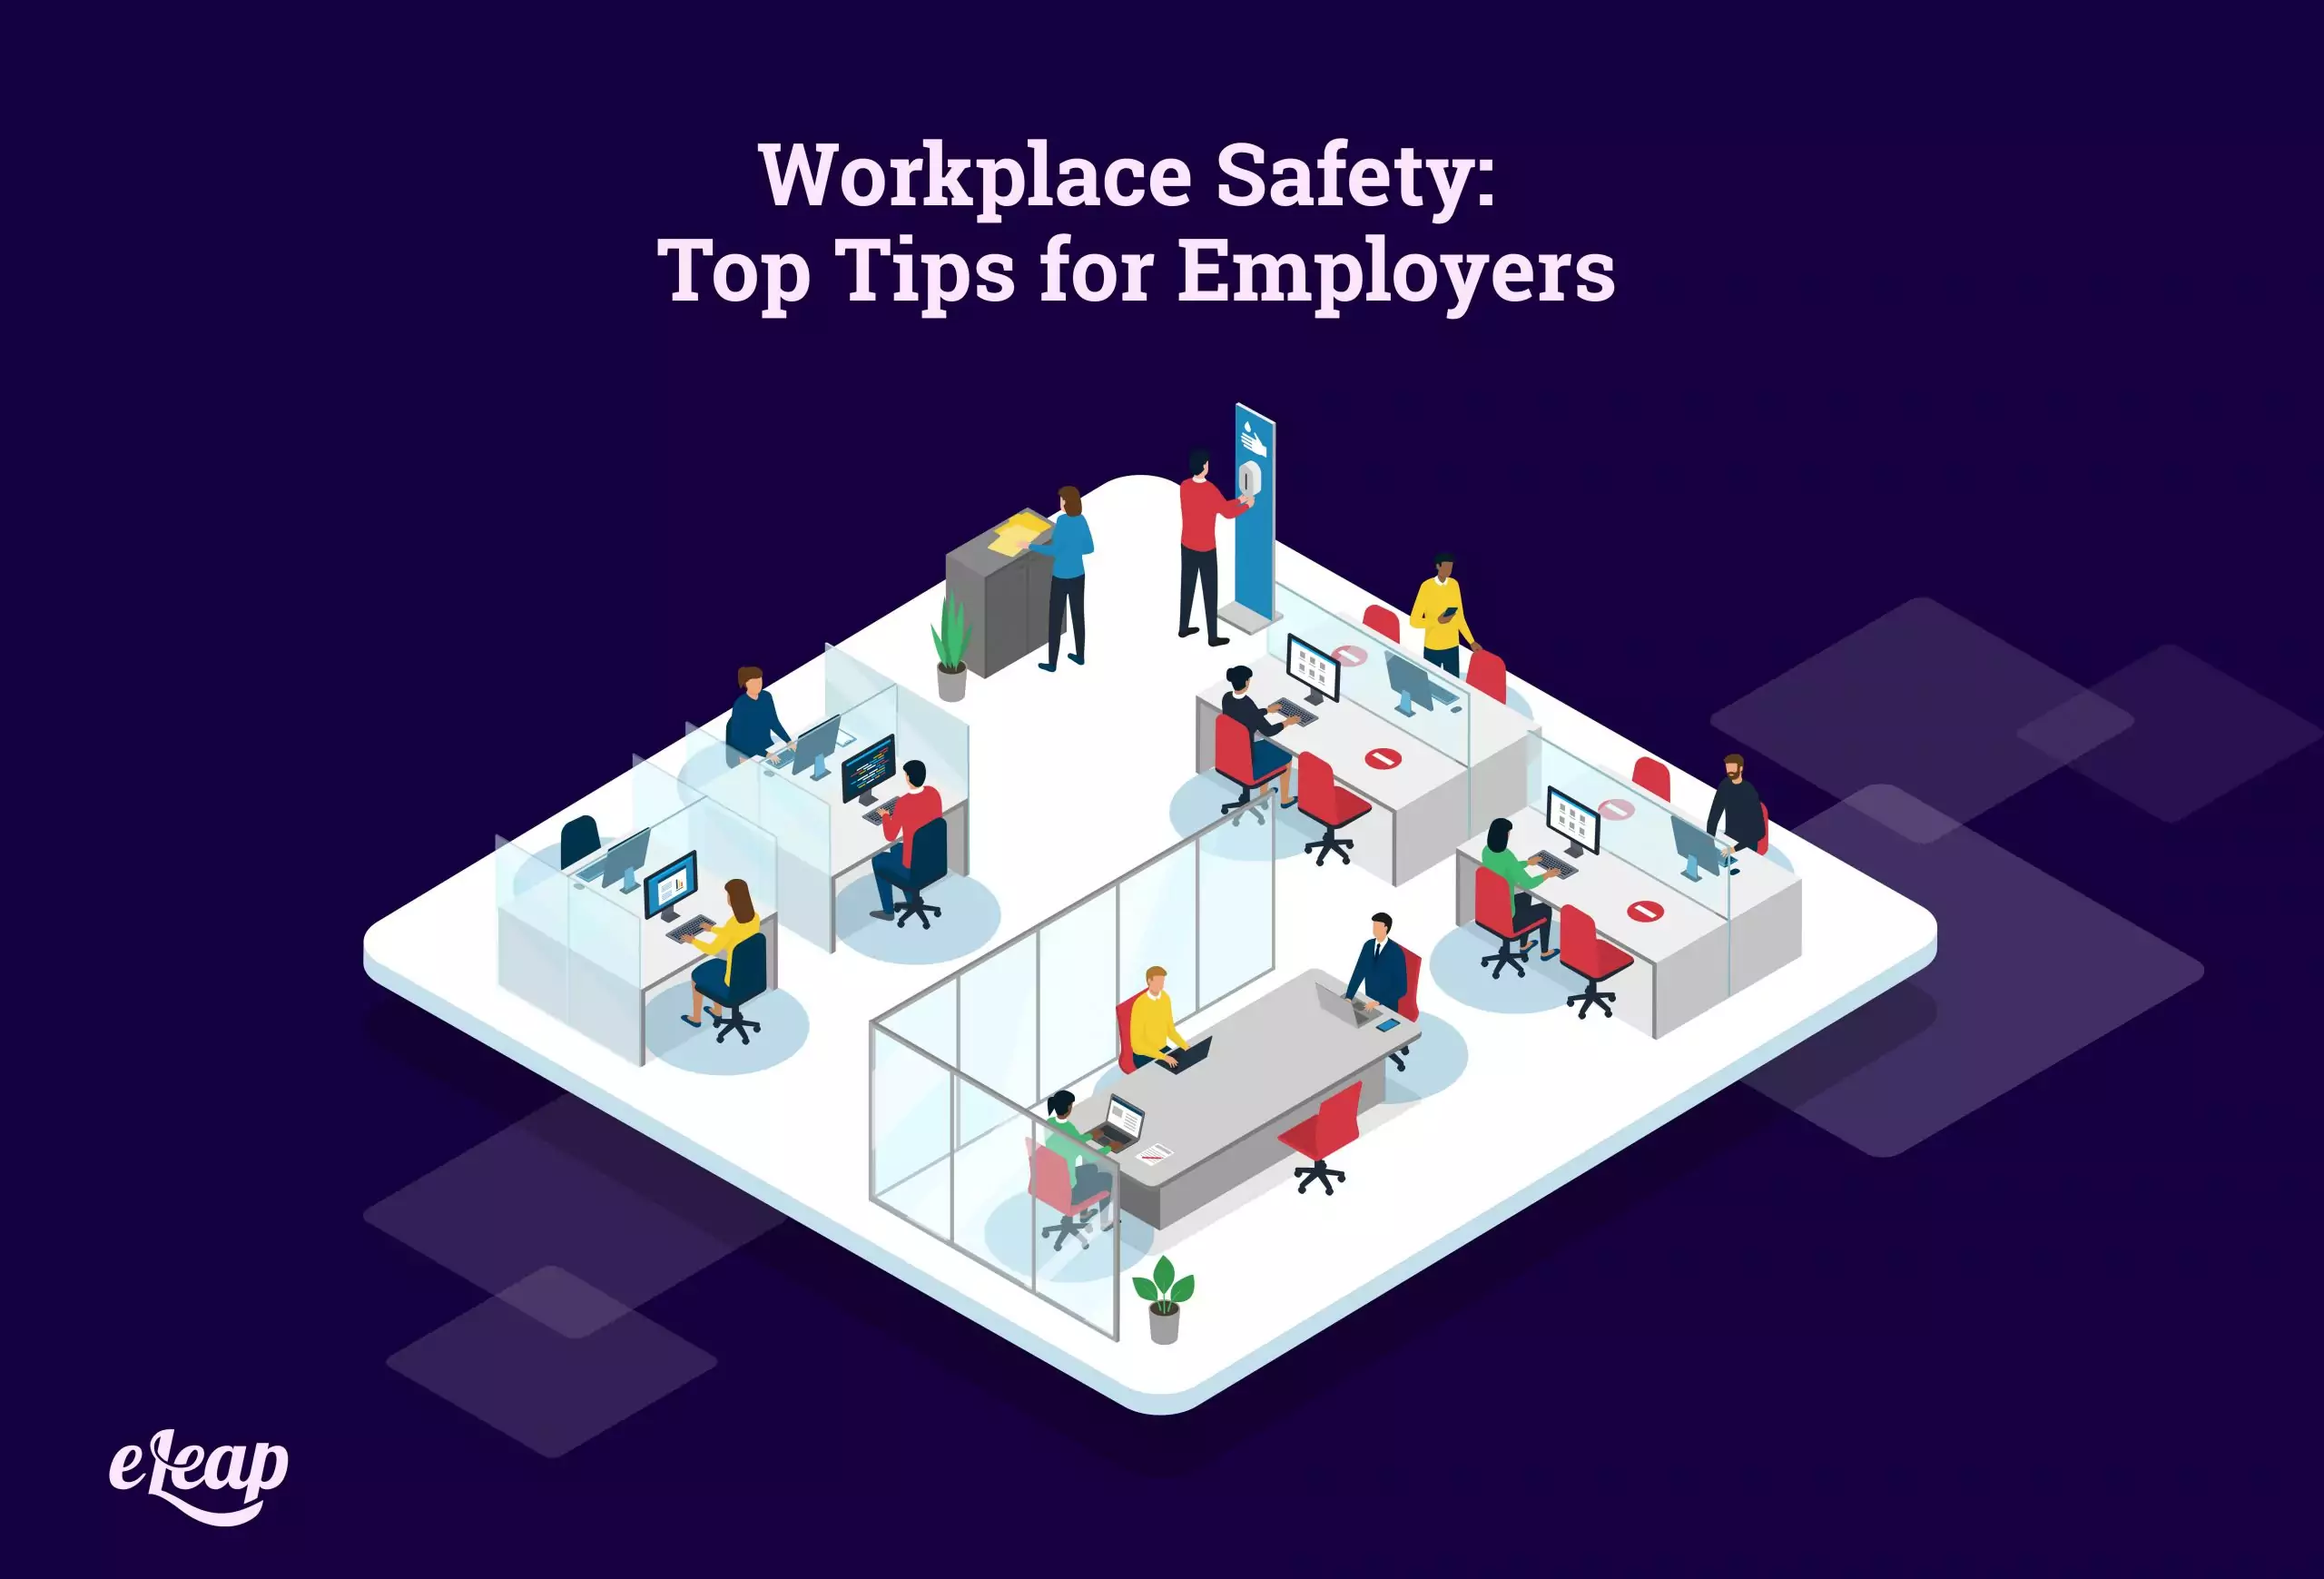 Workplace Safety: Top Tips for Employers